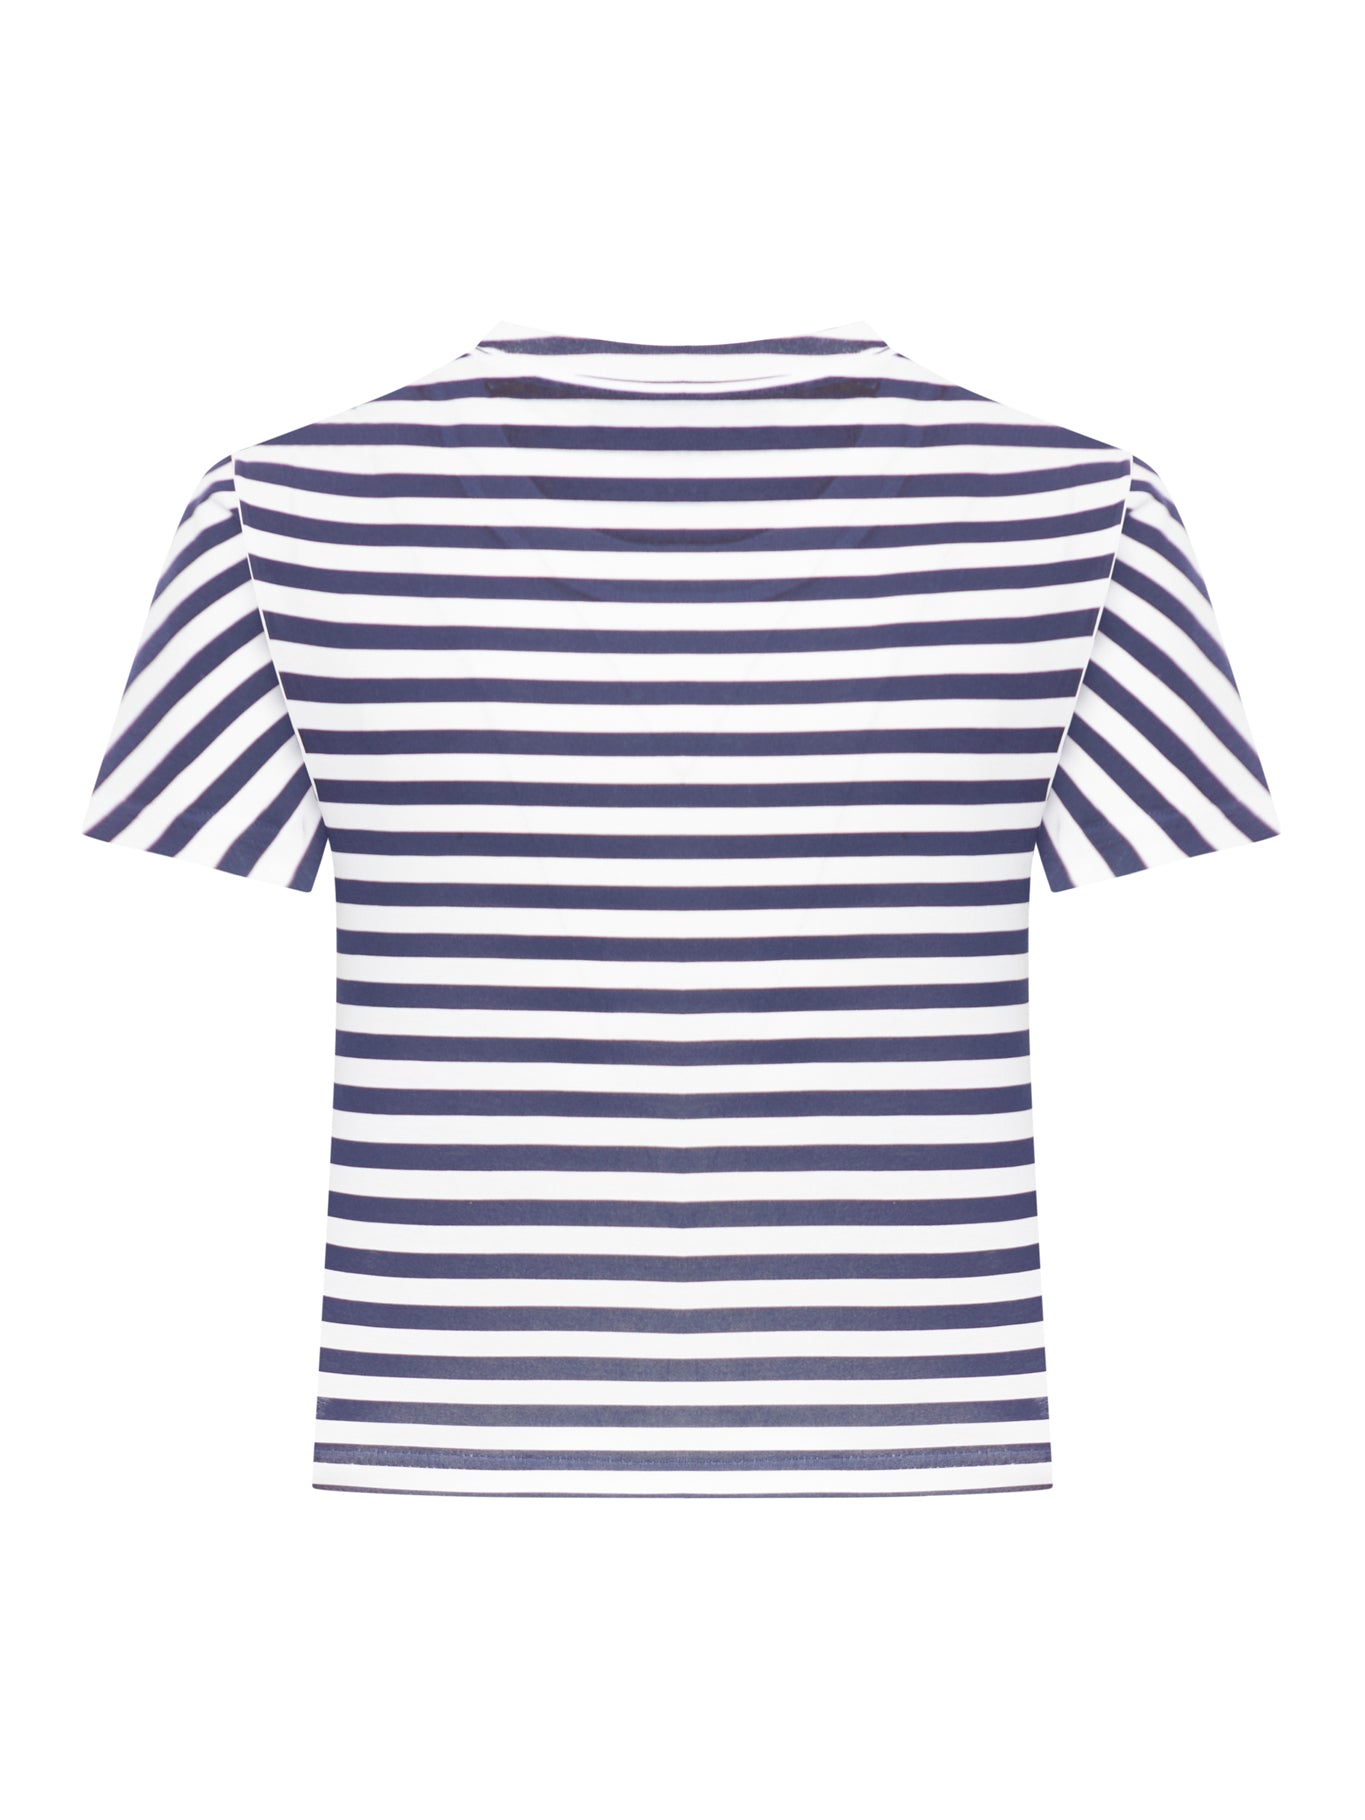 STRIPED COTTON JERSEY T-SHIRT WITH GUCCI PRINT